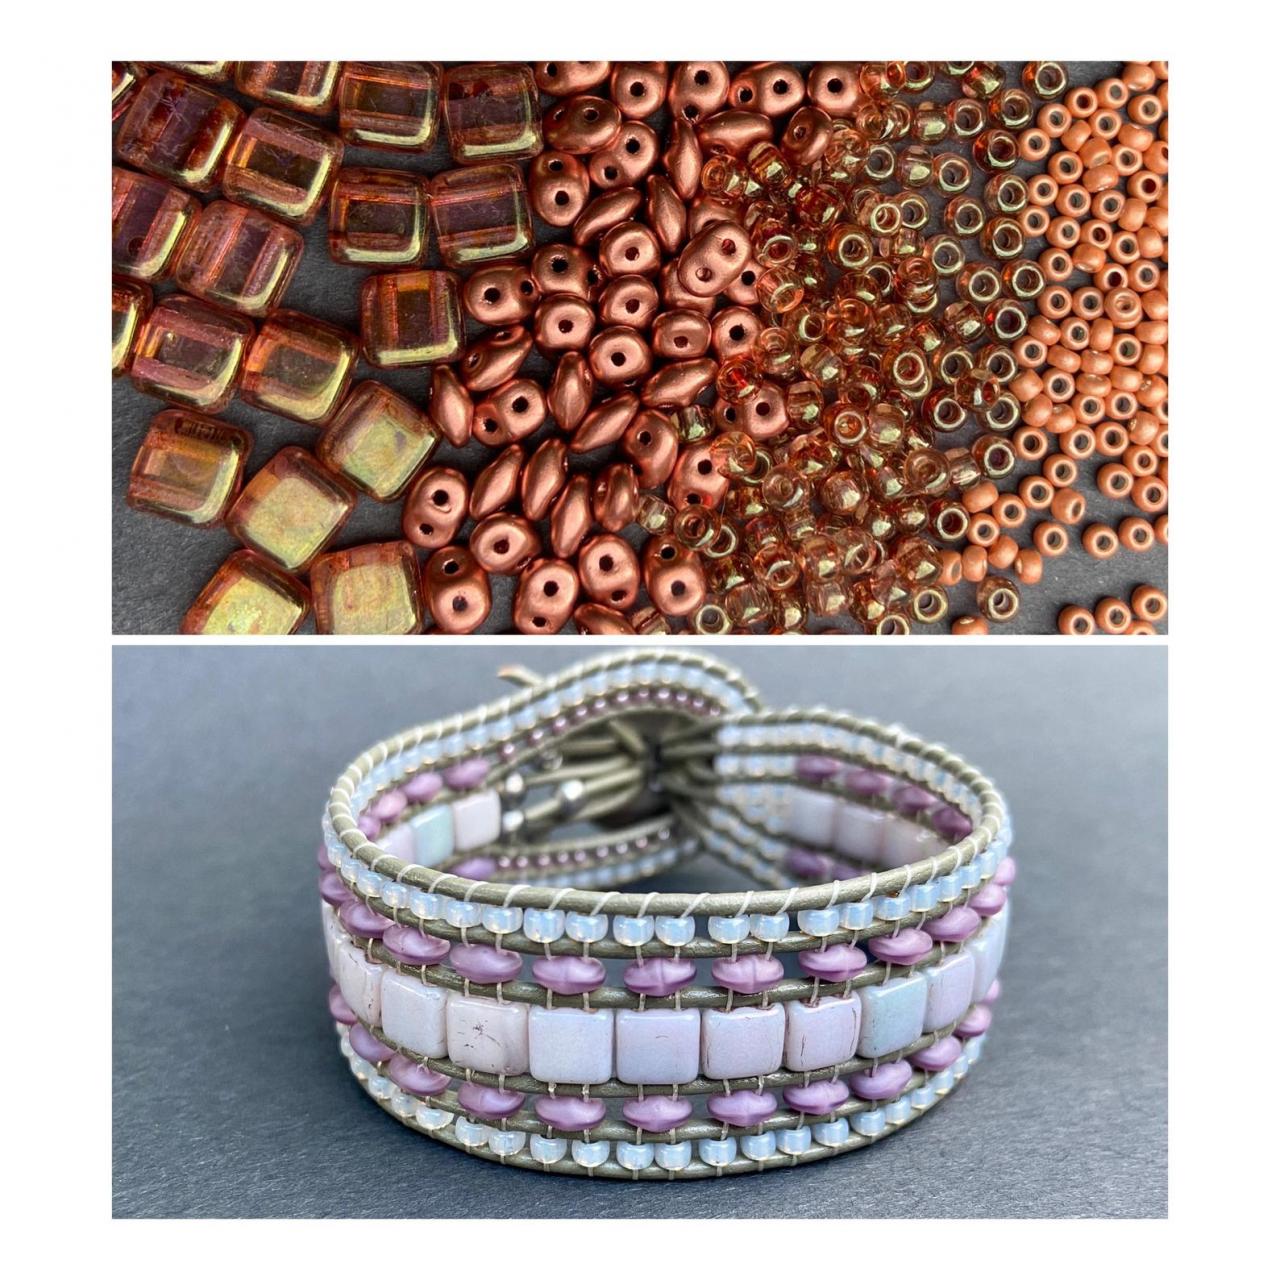 KIT Rose Gold Topaz Copper Wide Leather Beaded Cuff Kit by Leila Martin Bohemian DIY Intermediate Instructions Complete NO Tools